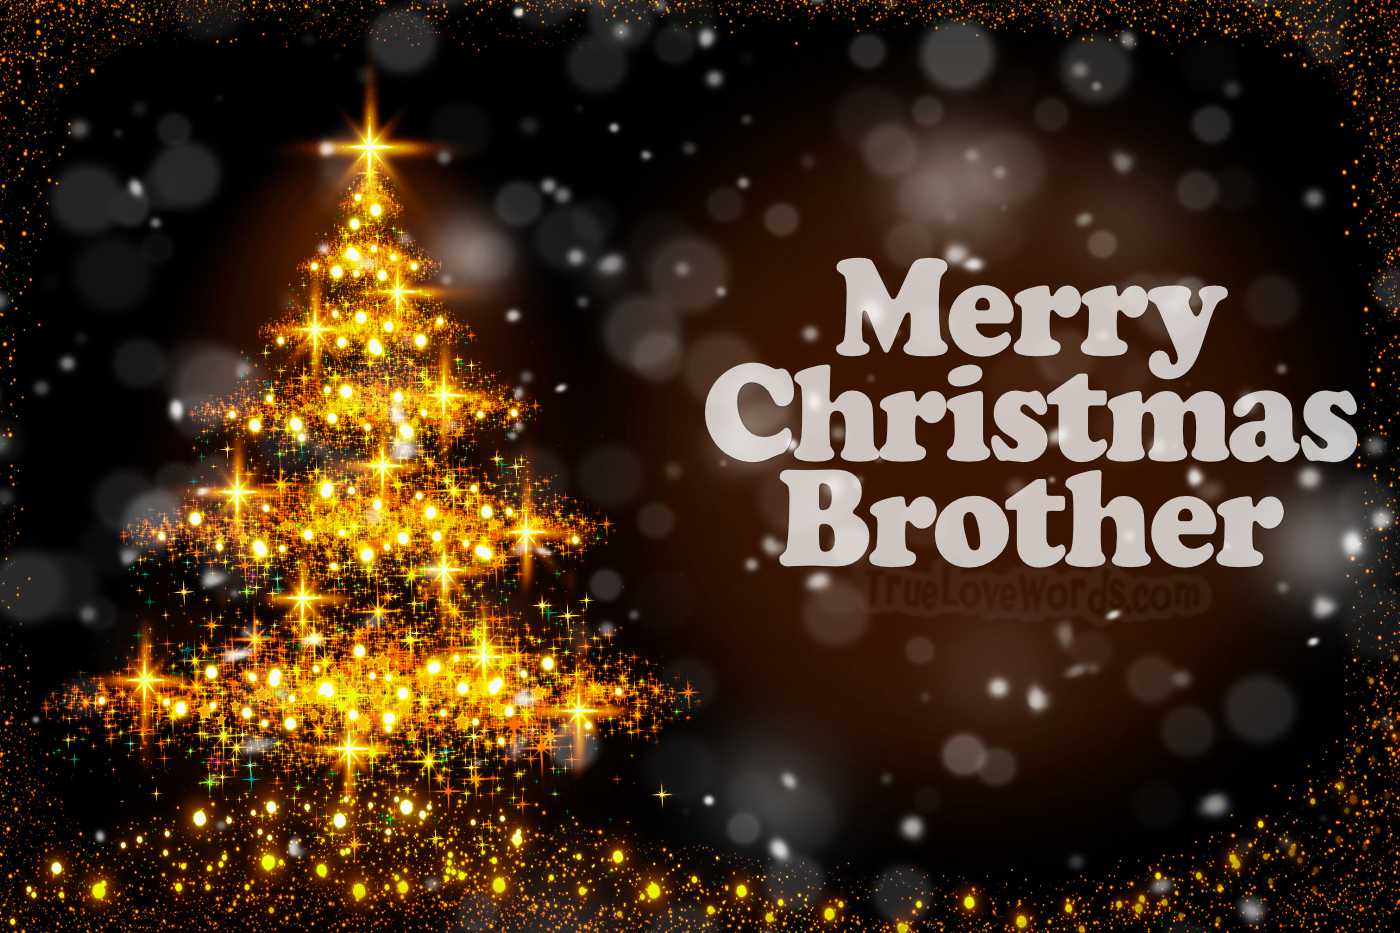 45 Lighthearted Christmas Wishes for Brother » True Love Words